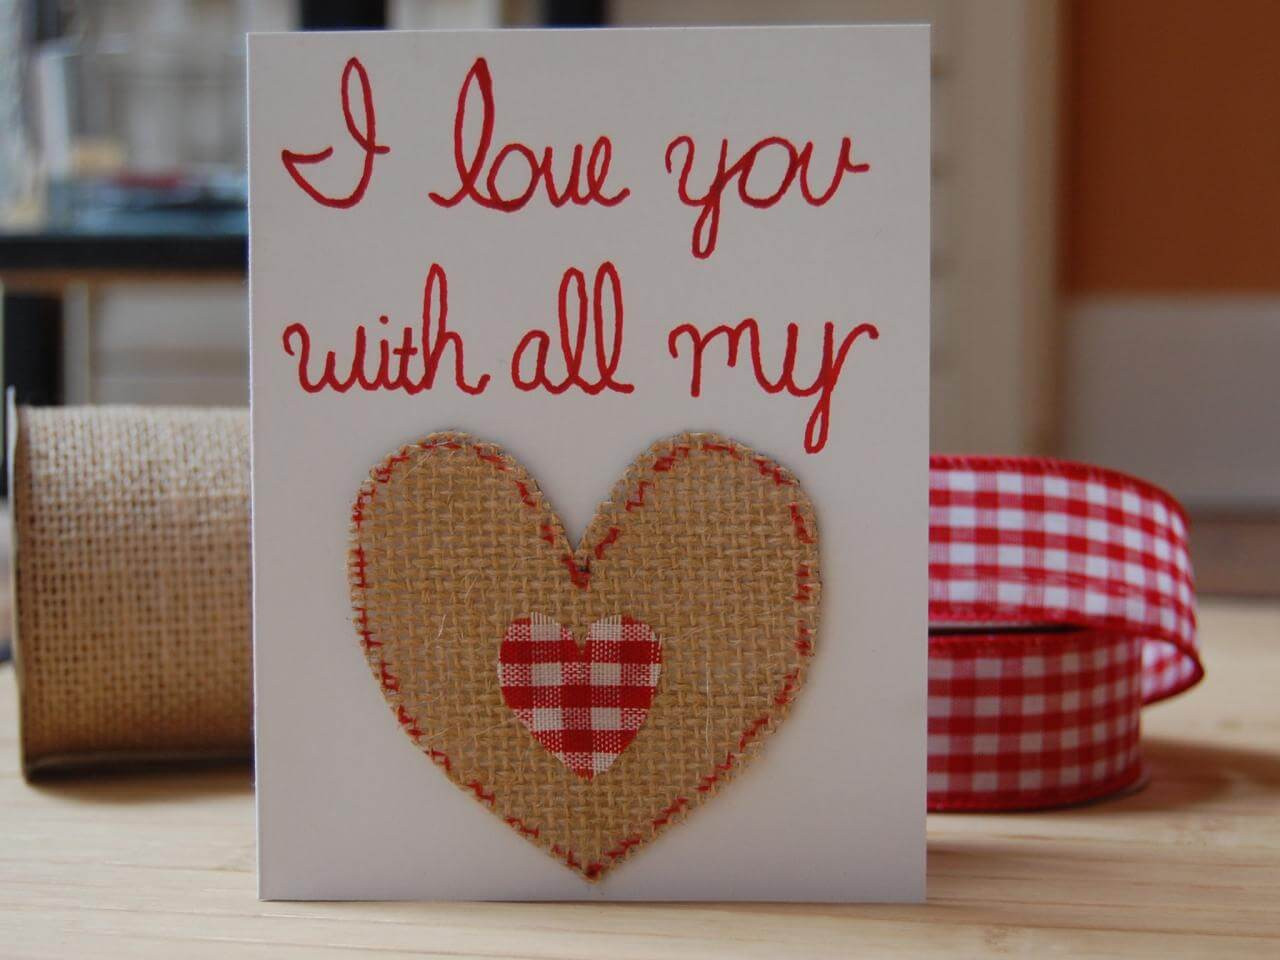 Gift Ideas For Him On Valentines
 45 Homemade Valentines Day Gift Ideas For Him